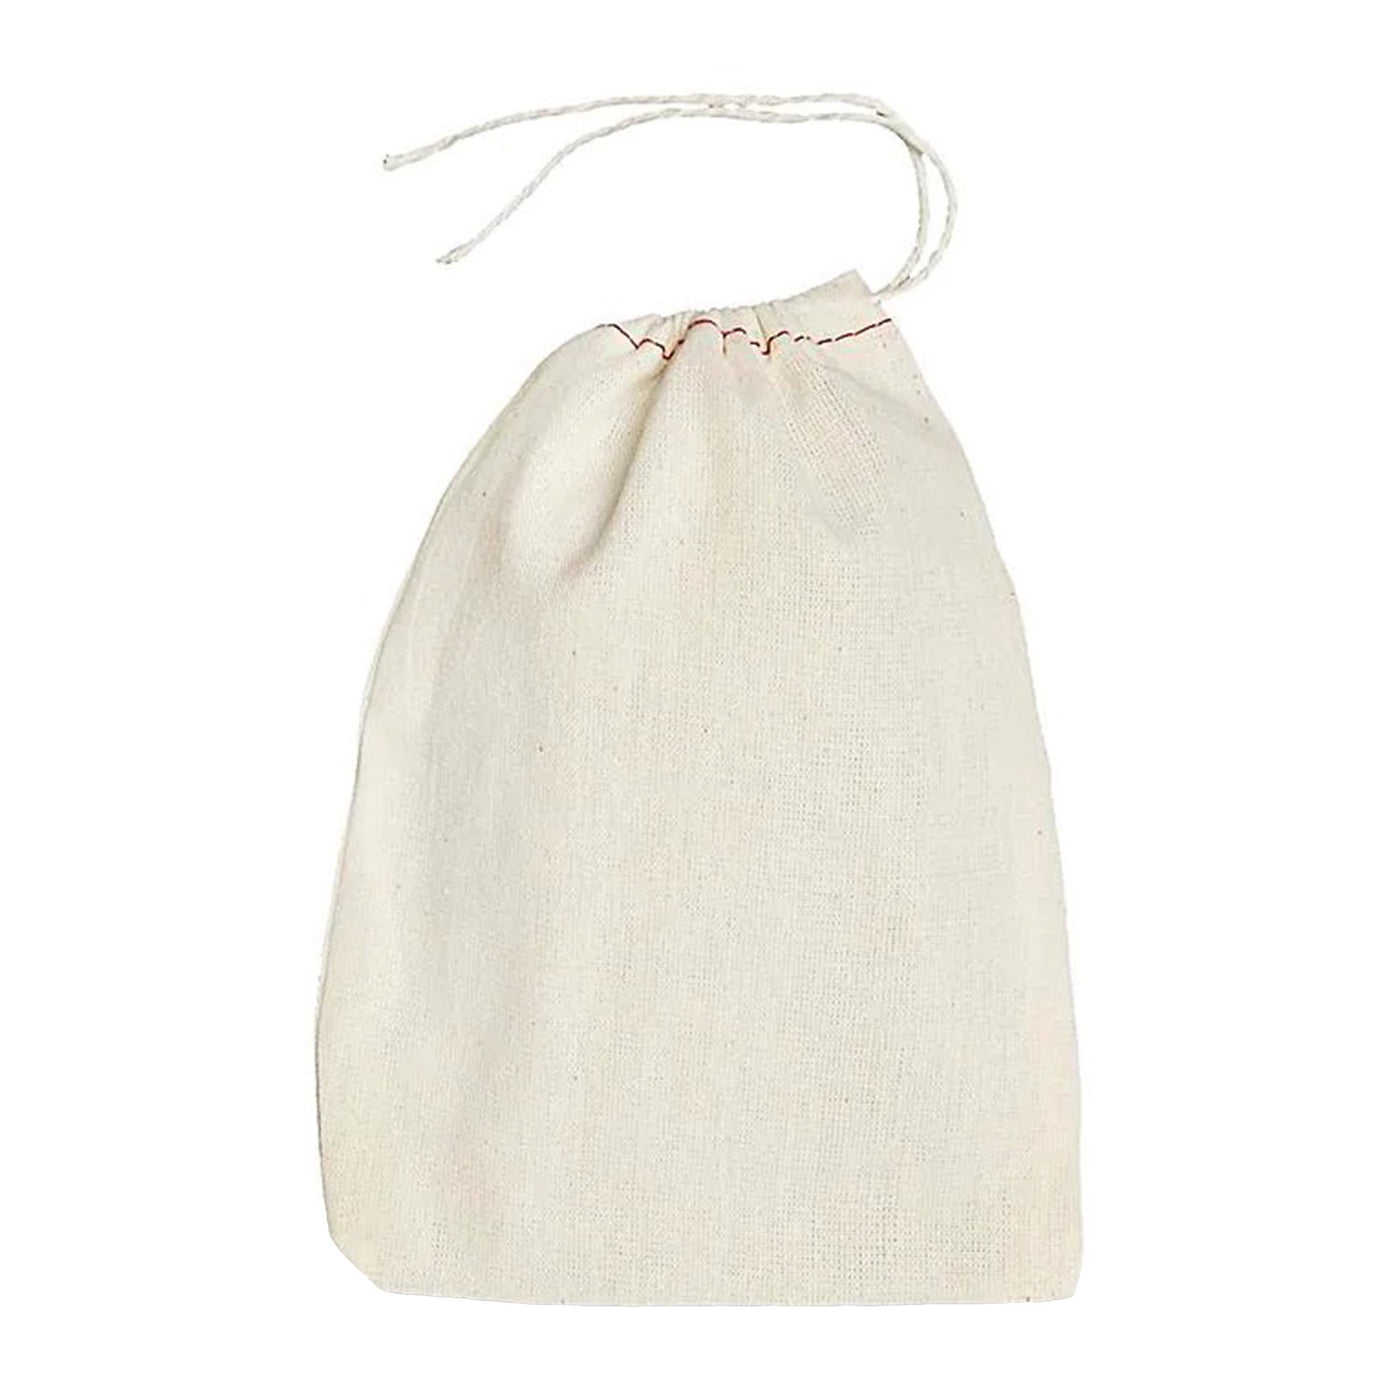 3x5 Eco 100% Cotton Bag - Oil Life Canada - Canada's Best Essential Oil Supplies